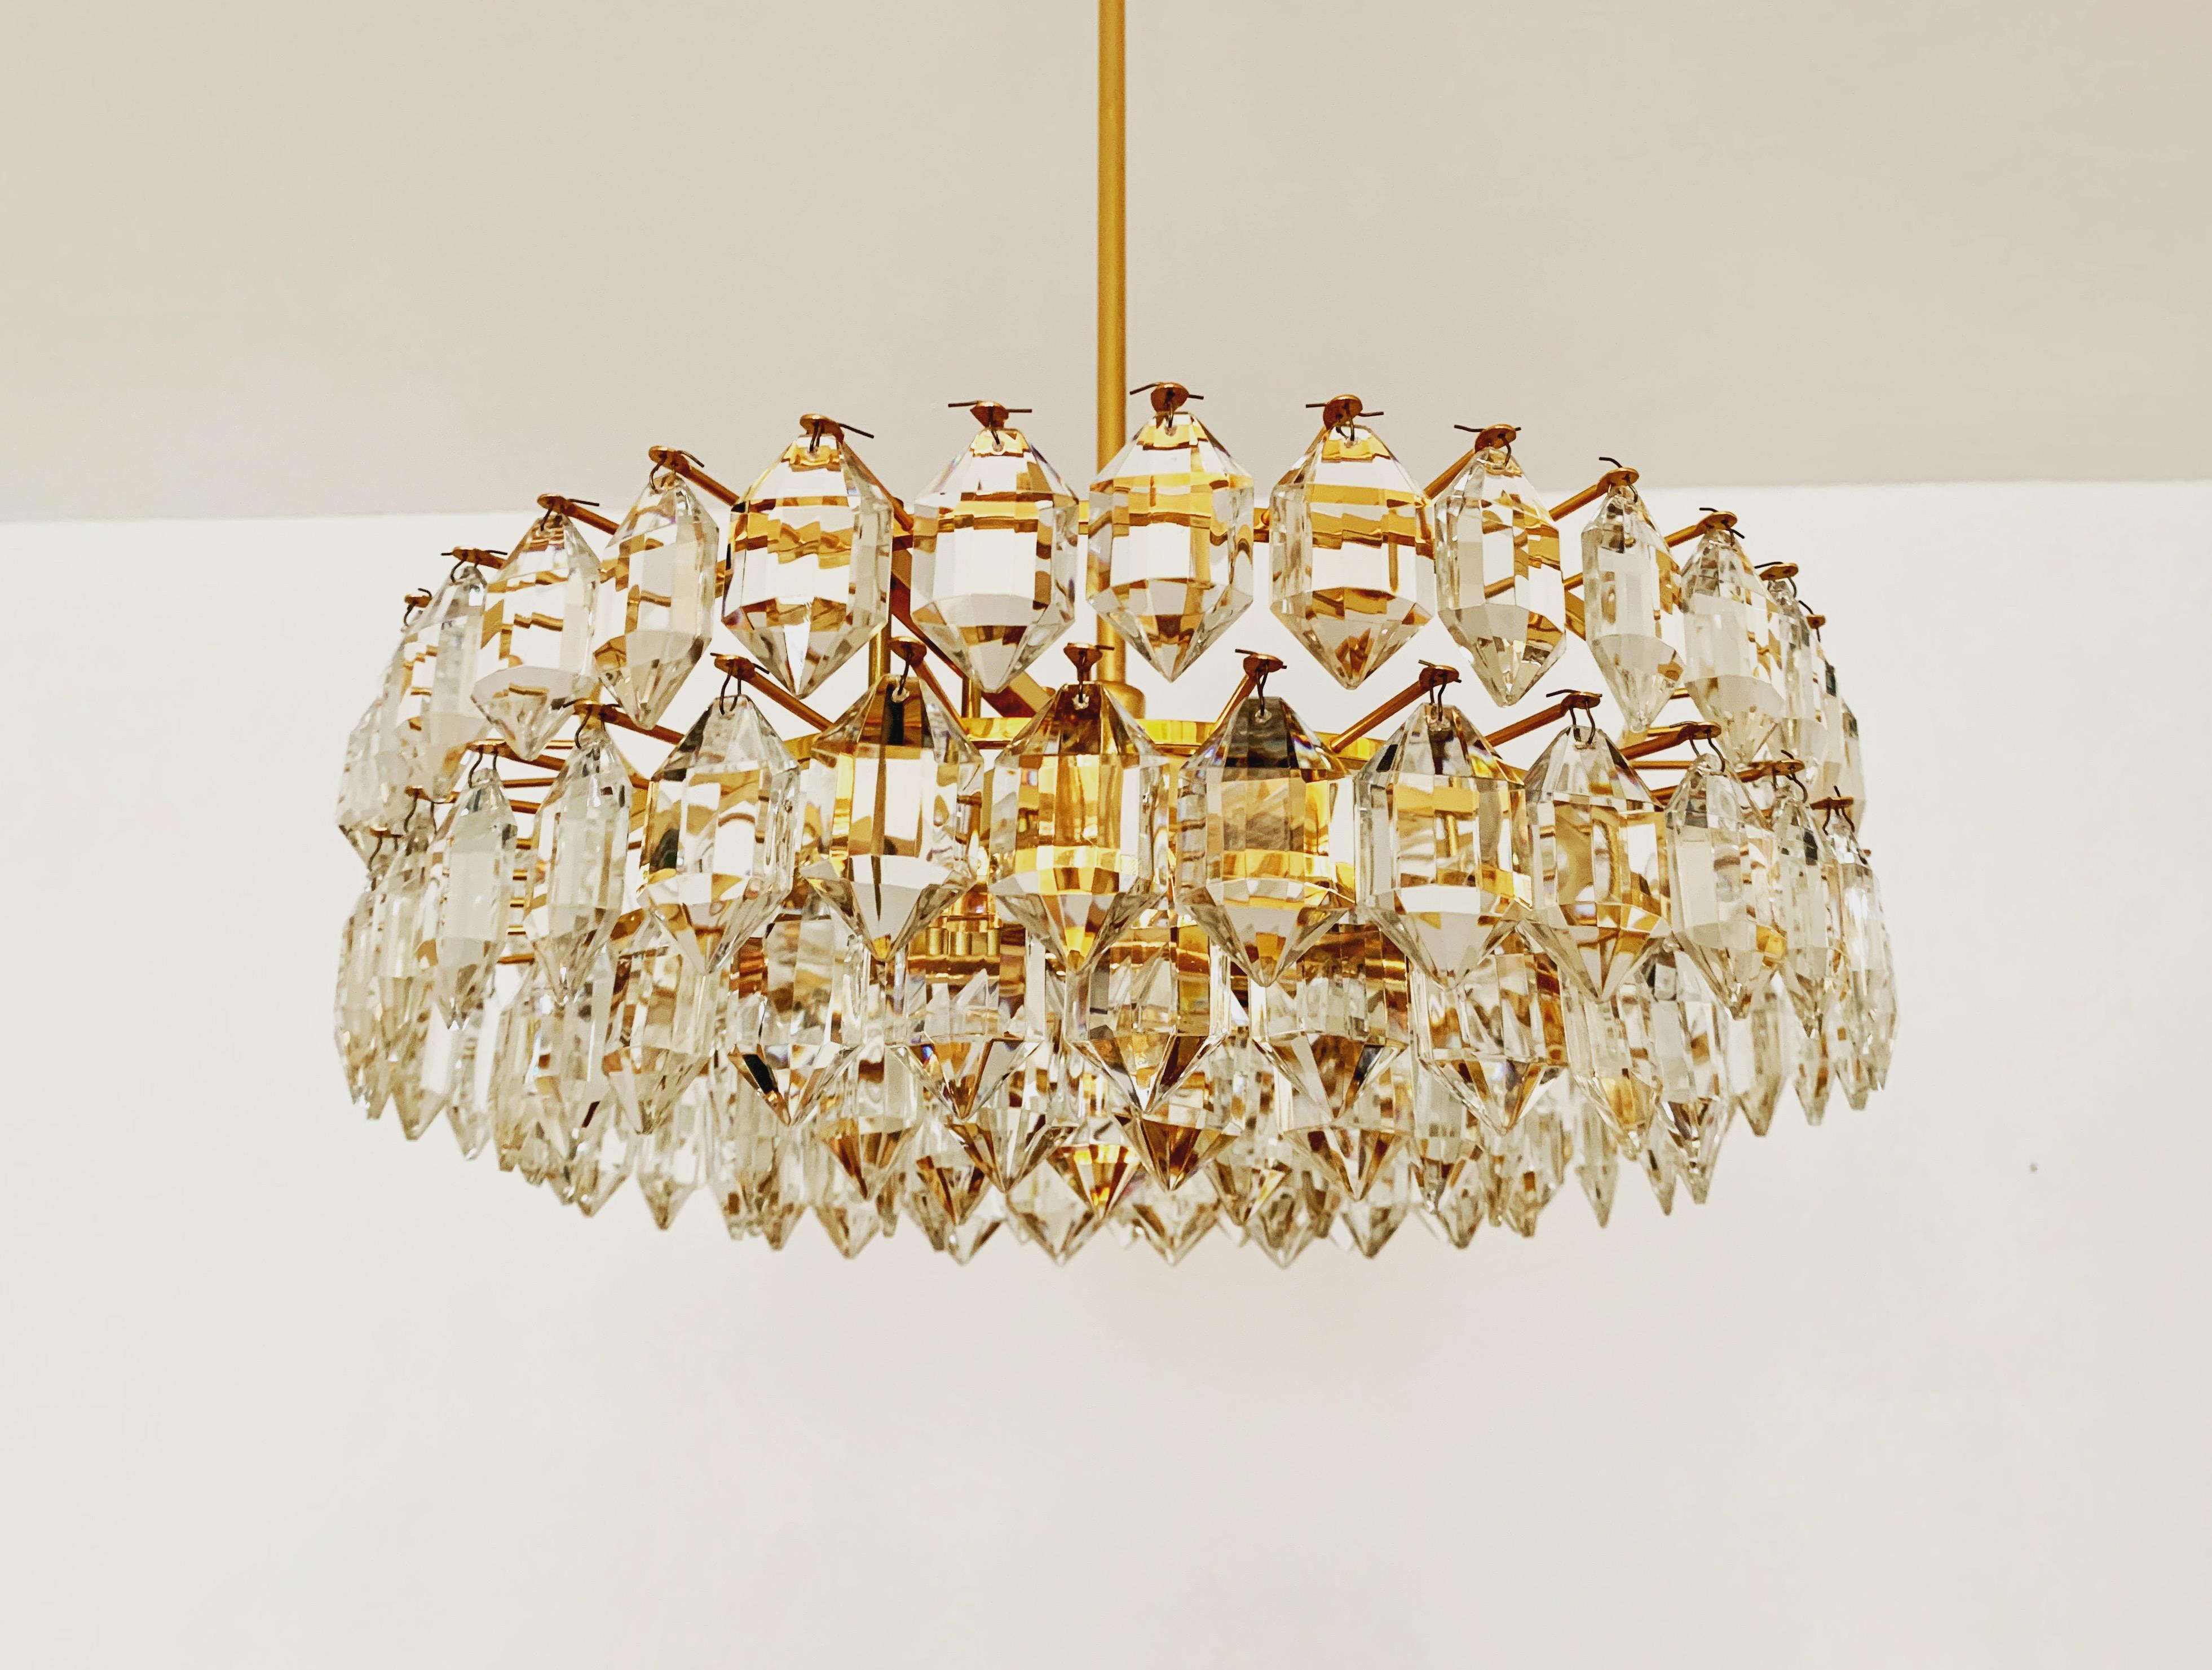 Extremely beautiful and high quality 5 tier chandelier from the 1960s.
The high-quality workmanship and the very noble material impress at first sight.
Exceptionally beautiful design.
The 126 crystals spread a spectacular play of light in the